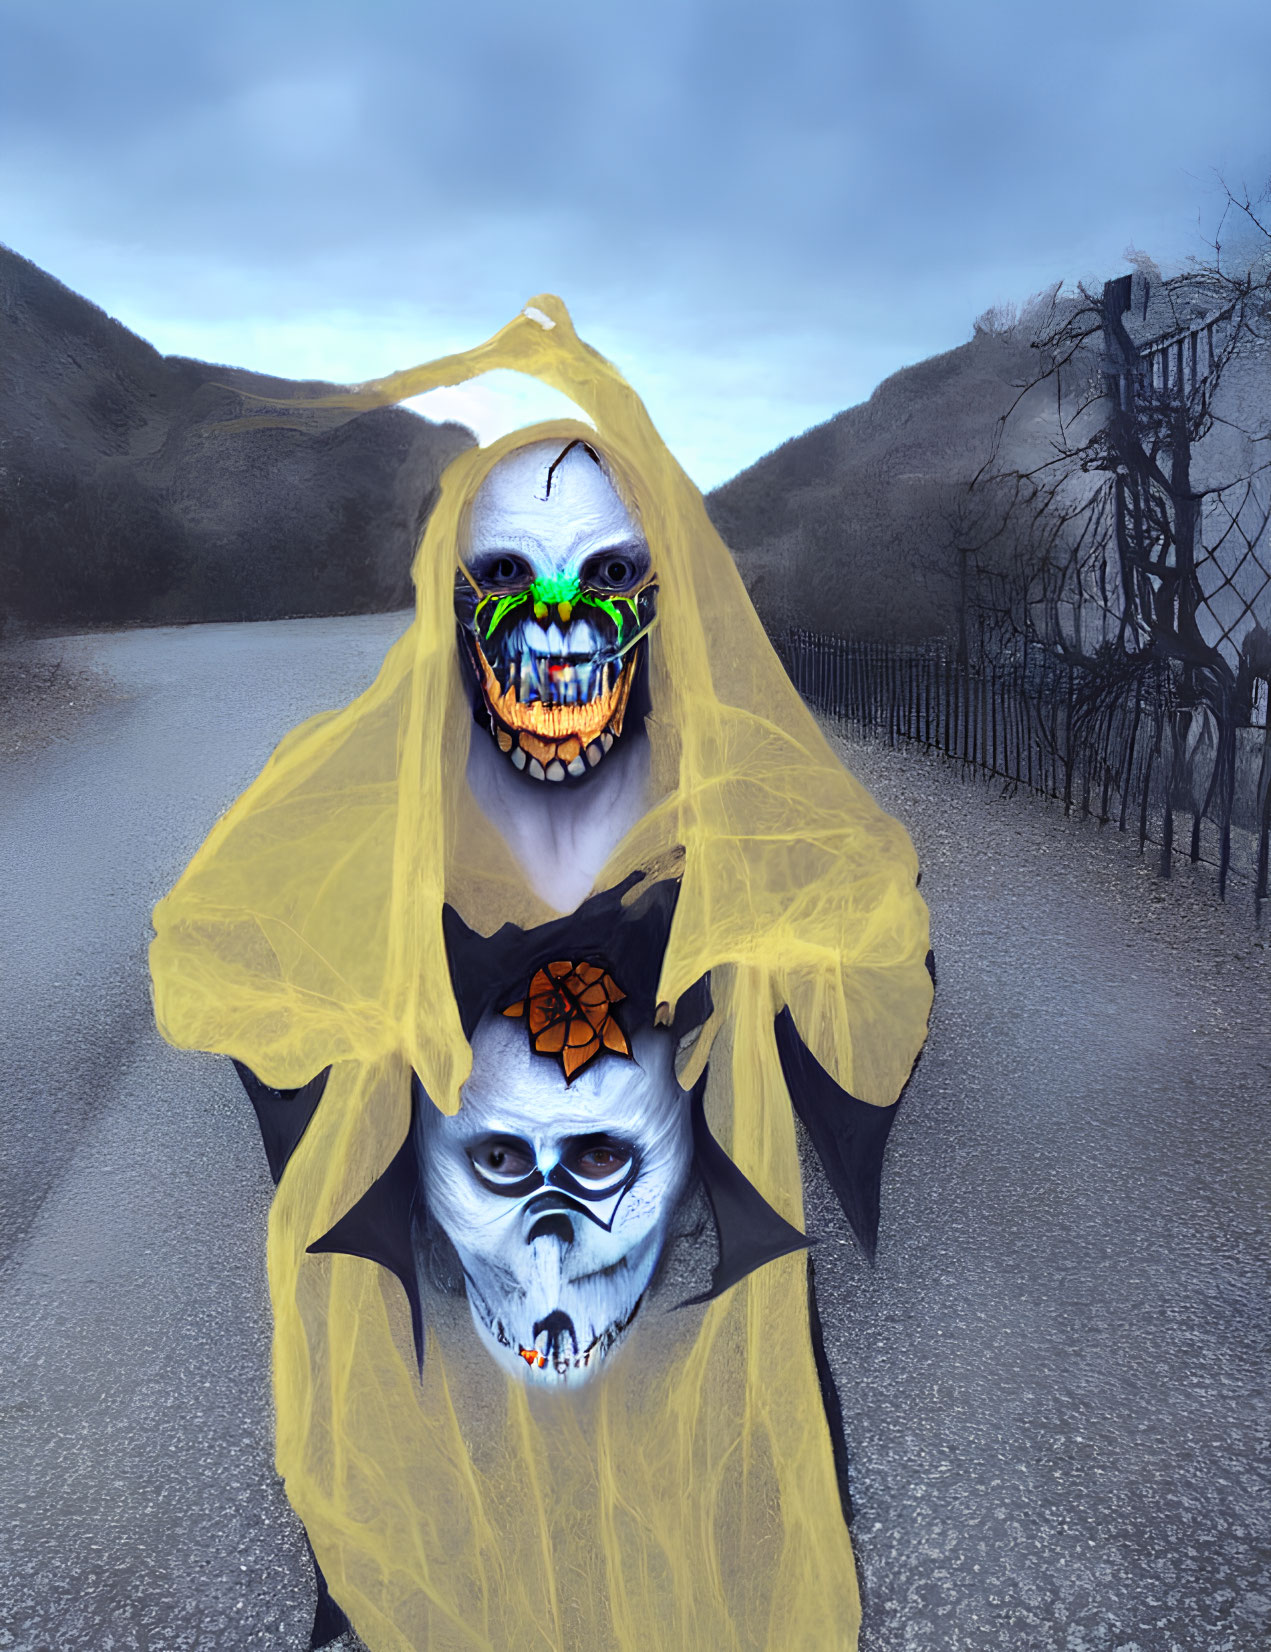 Double-faced Halloween costume with skull makeup on desolate road.